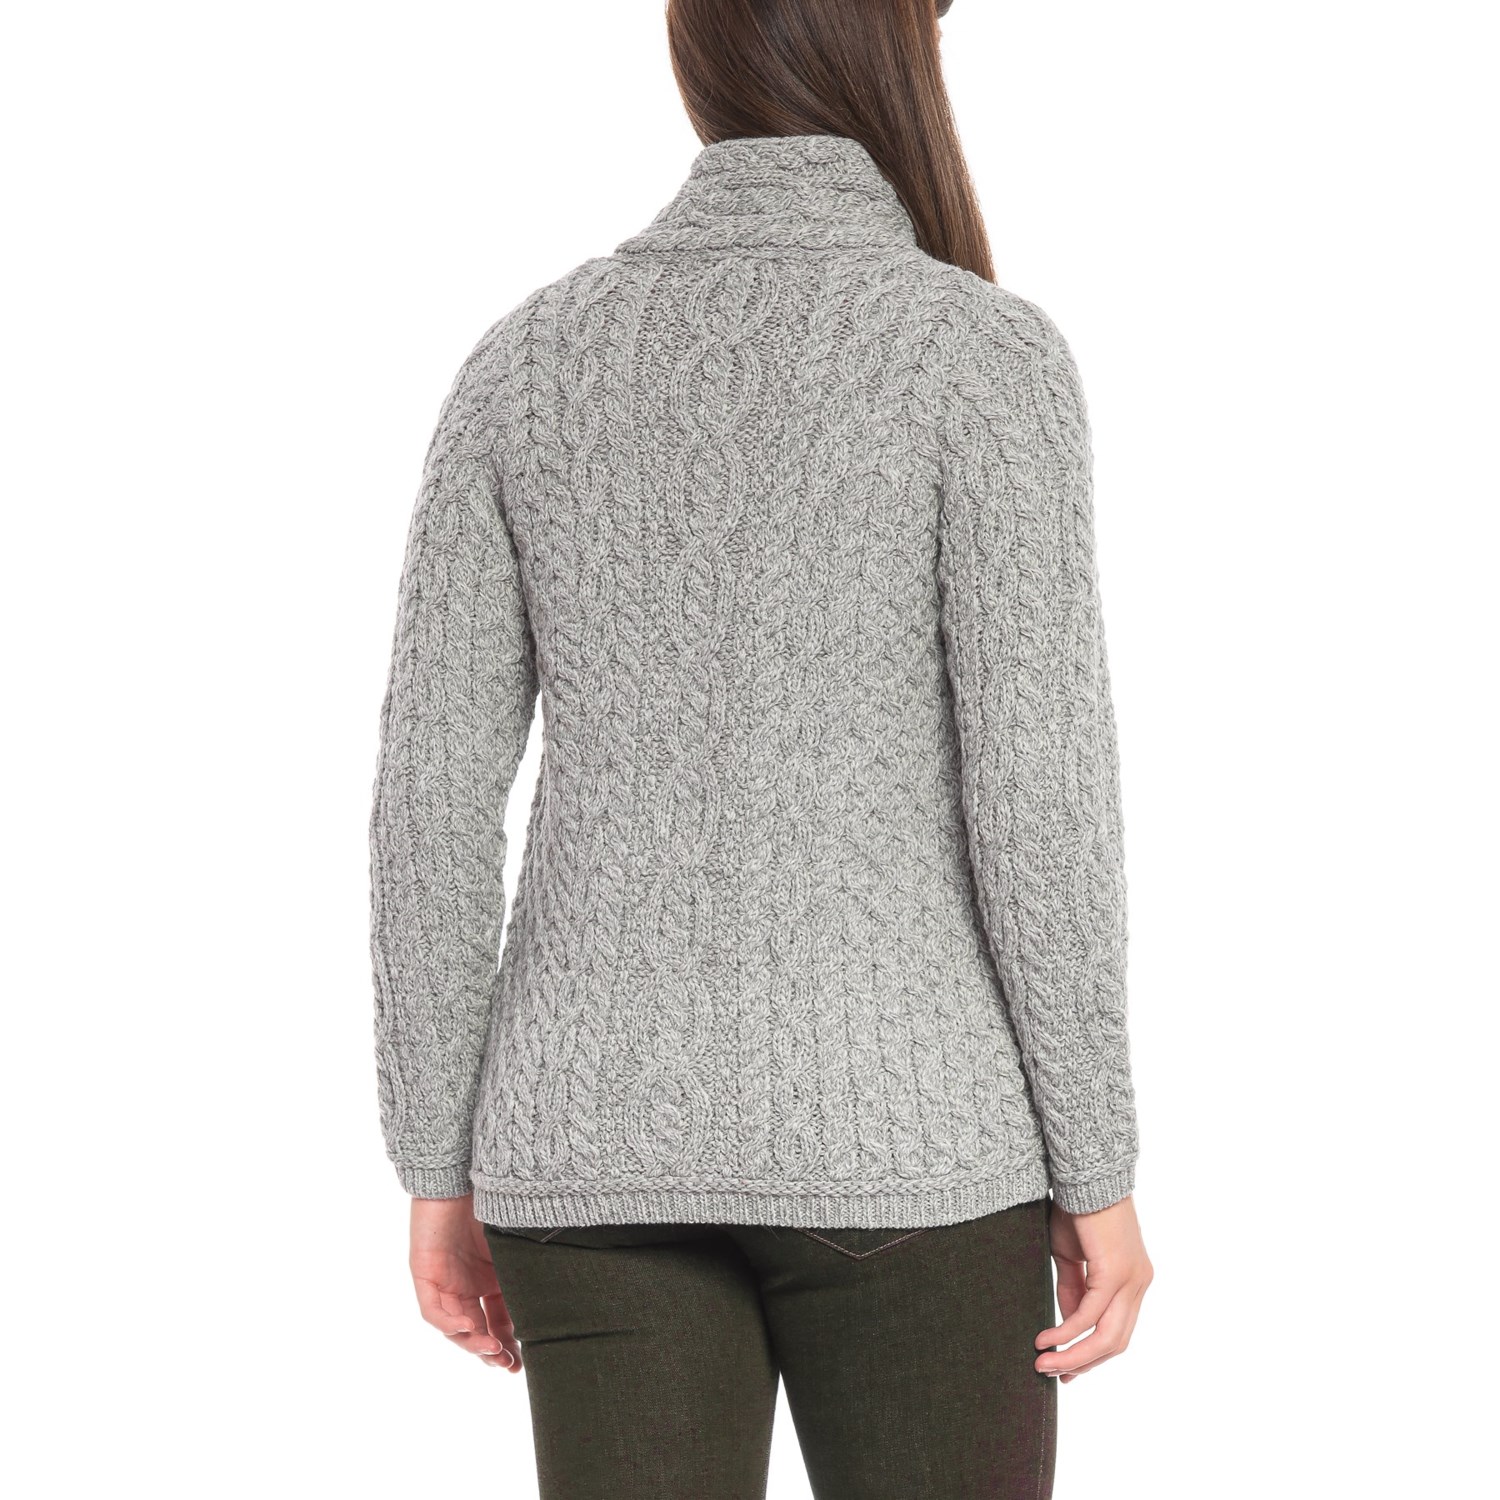 Inis Crafts Made in Ireland Three-Button Asymmetrical Cardigan Sweater ...